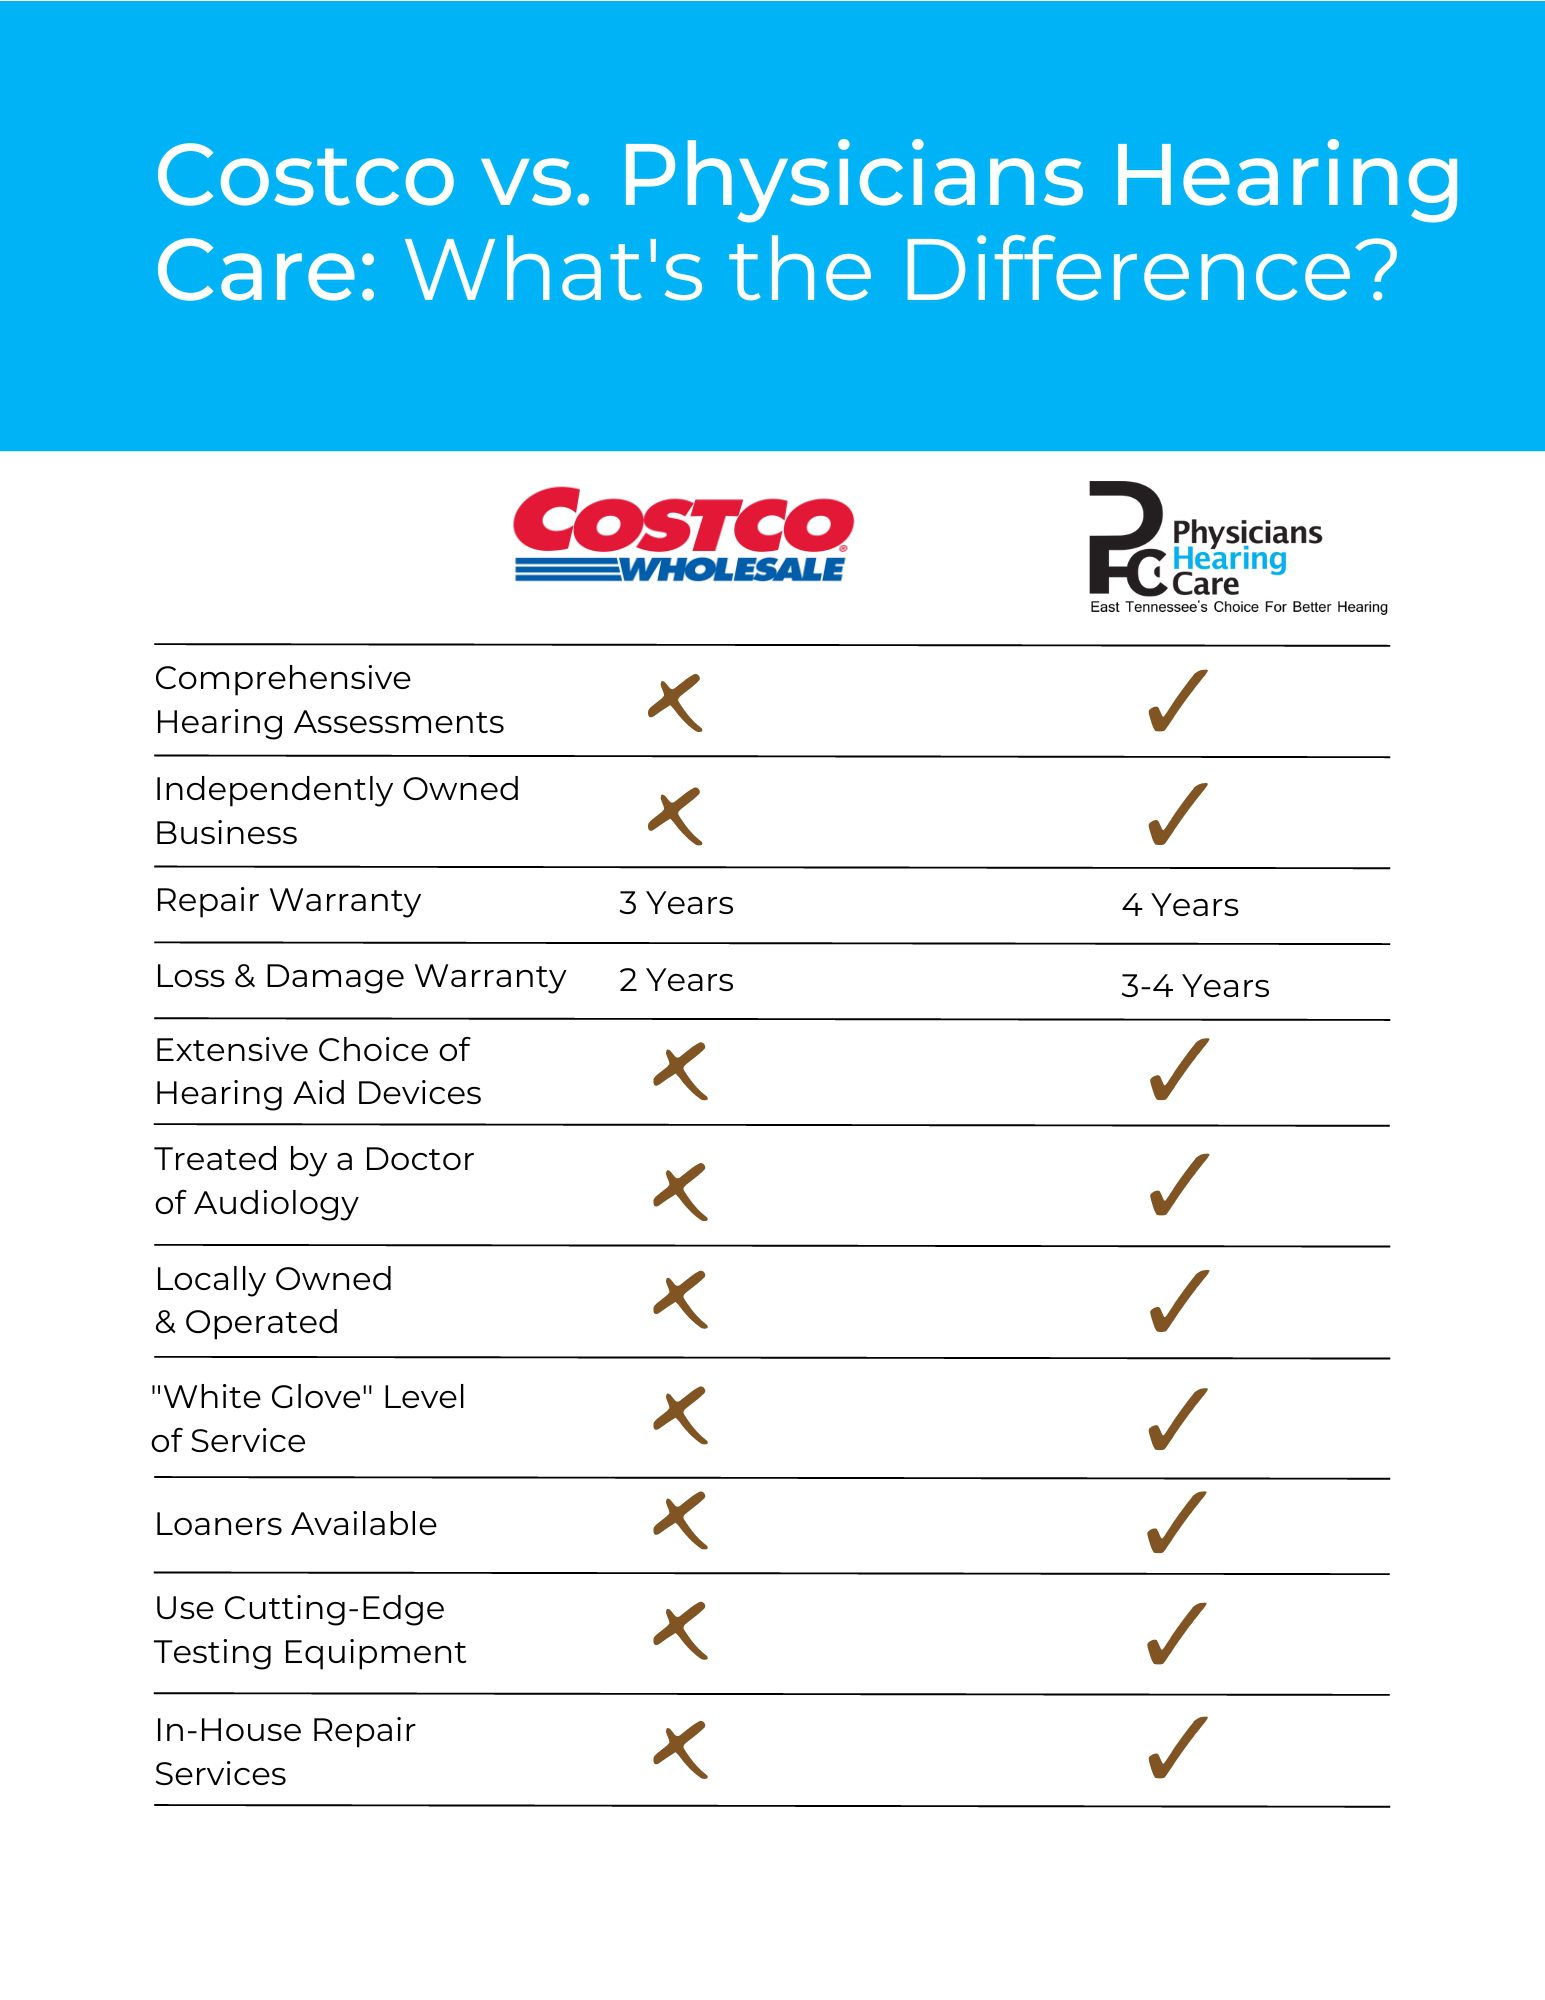 Costco vs. Physicians Hearing Care: What's the Difference?